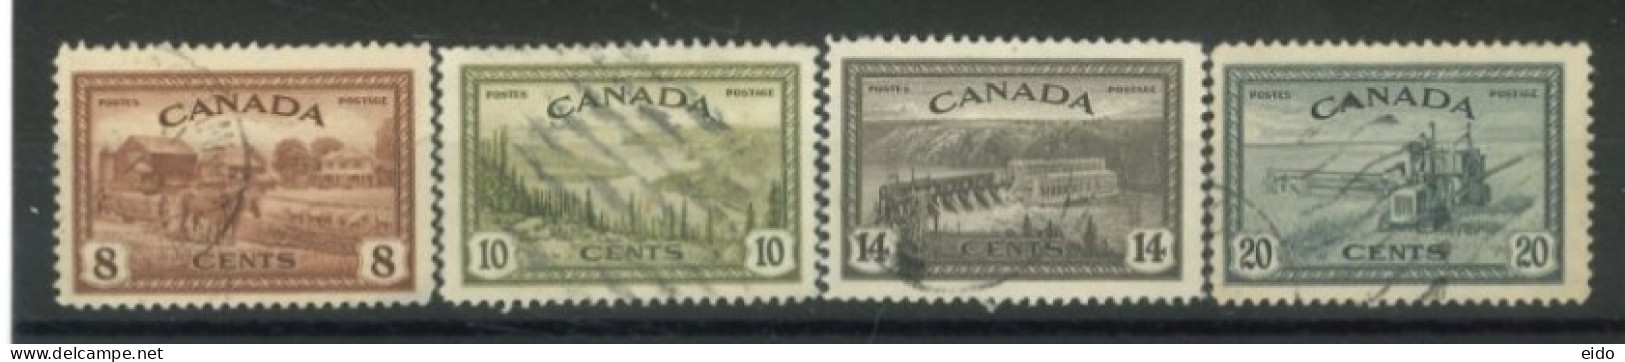 CANADA - 1946, RE CONVERTION TO PEACE STAMPS SET OF 4, USED. - Gebraucht